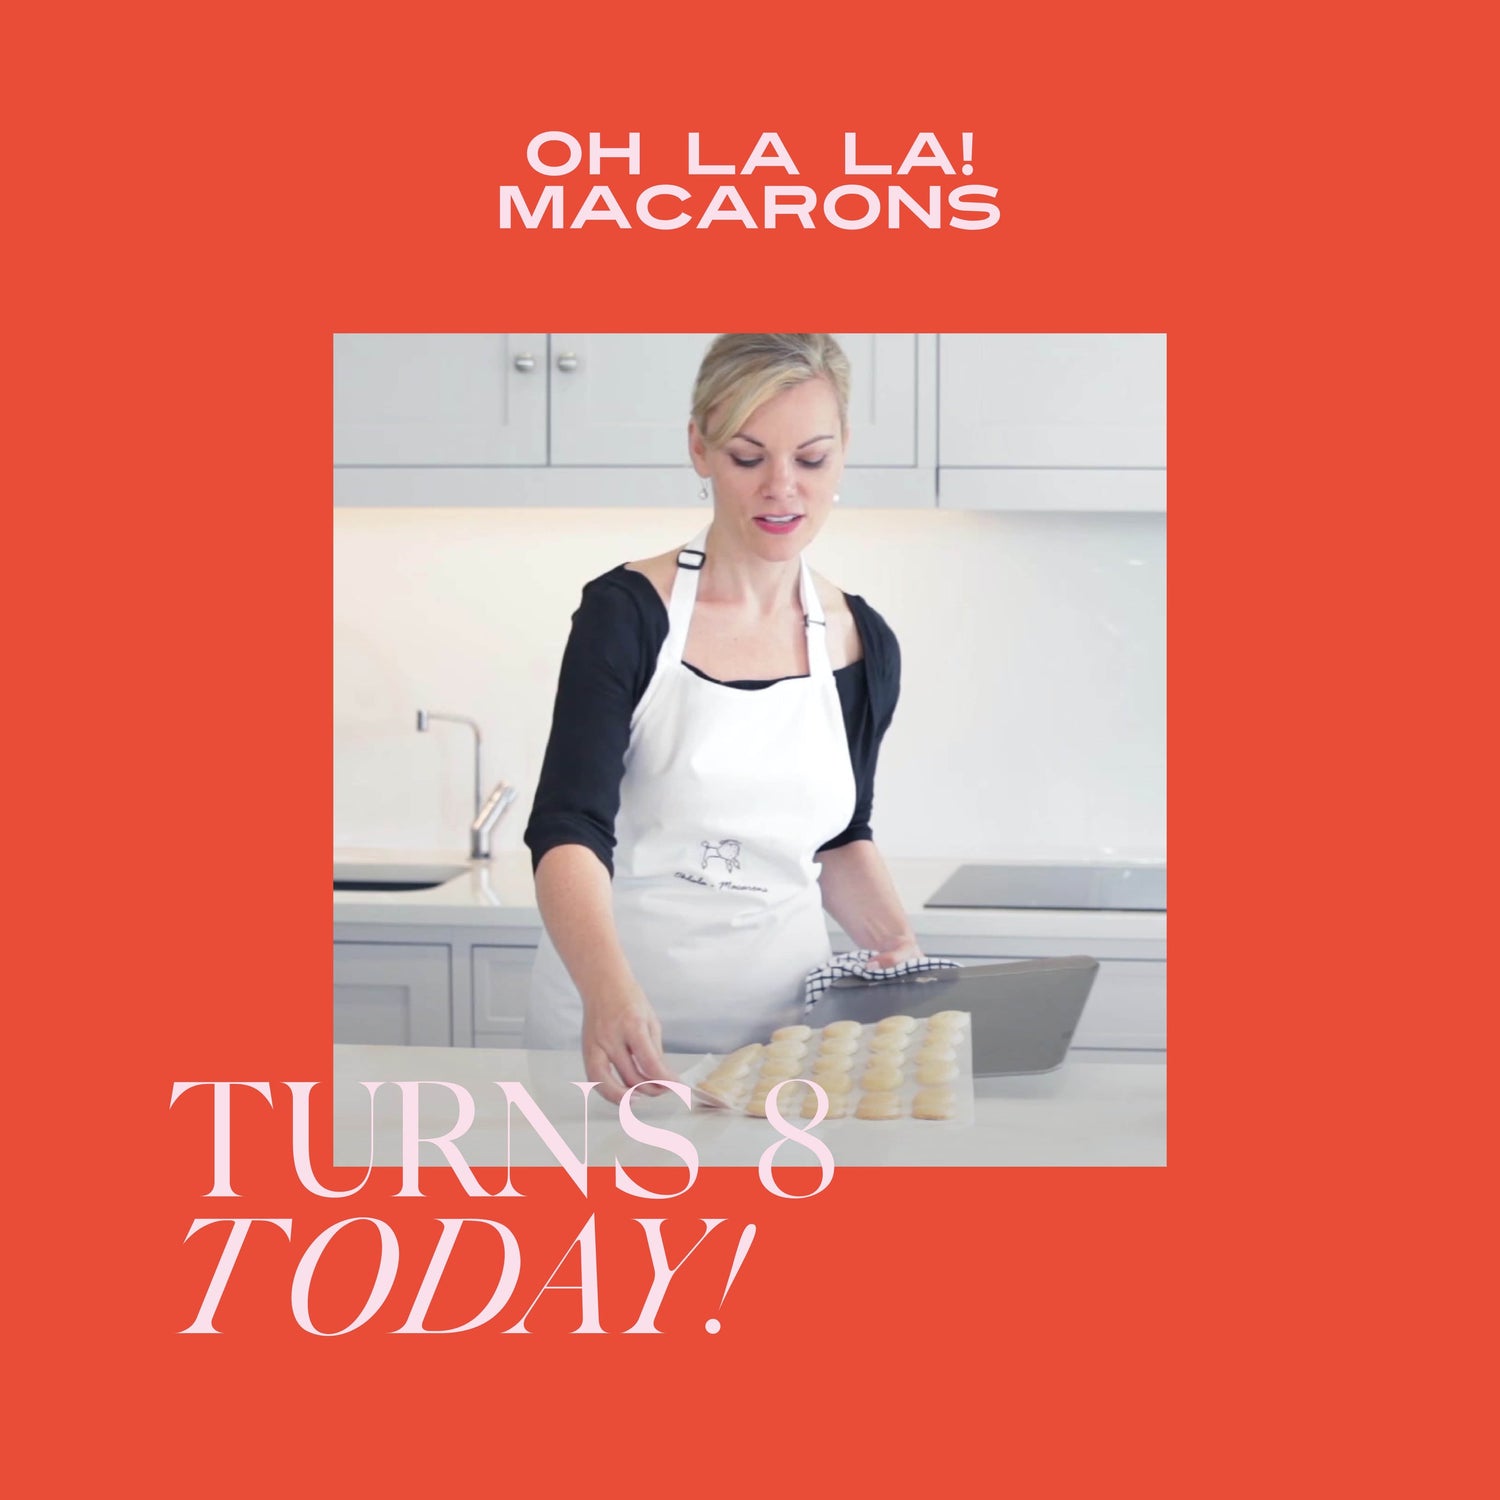 8 of the best Oh La La! Macarons moments from 8 years in the business